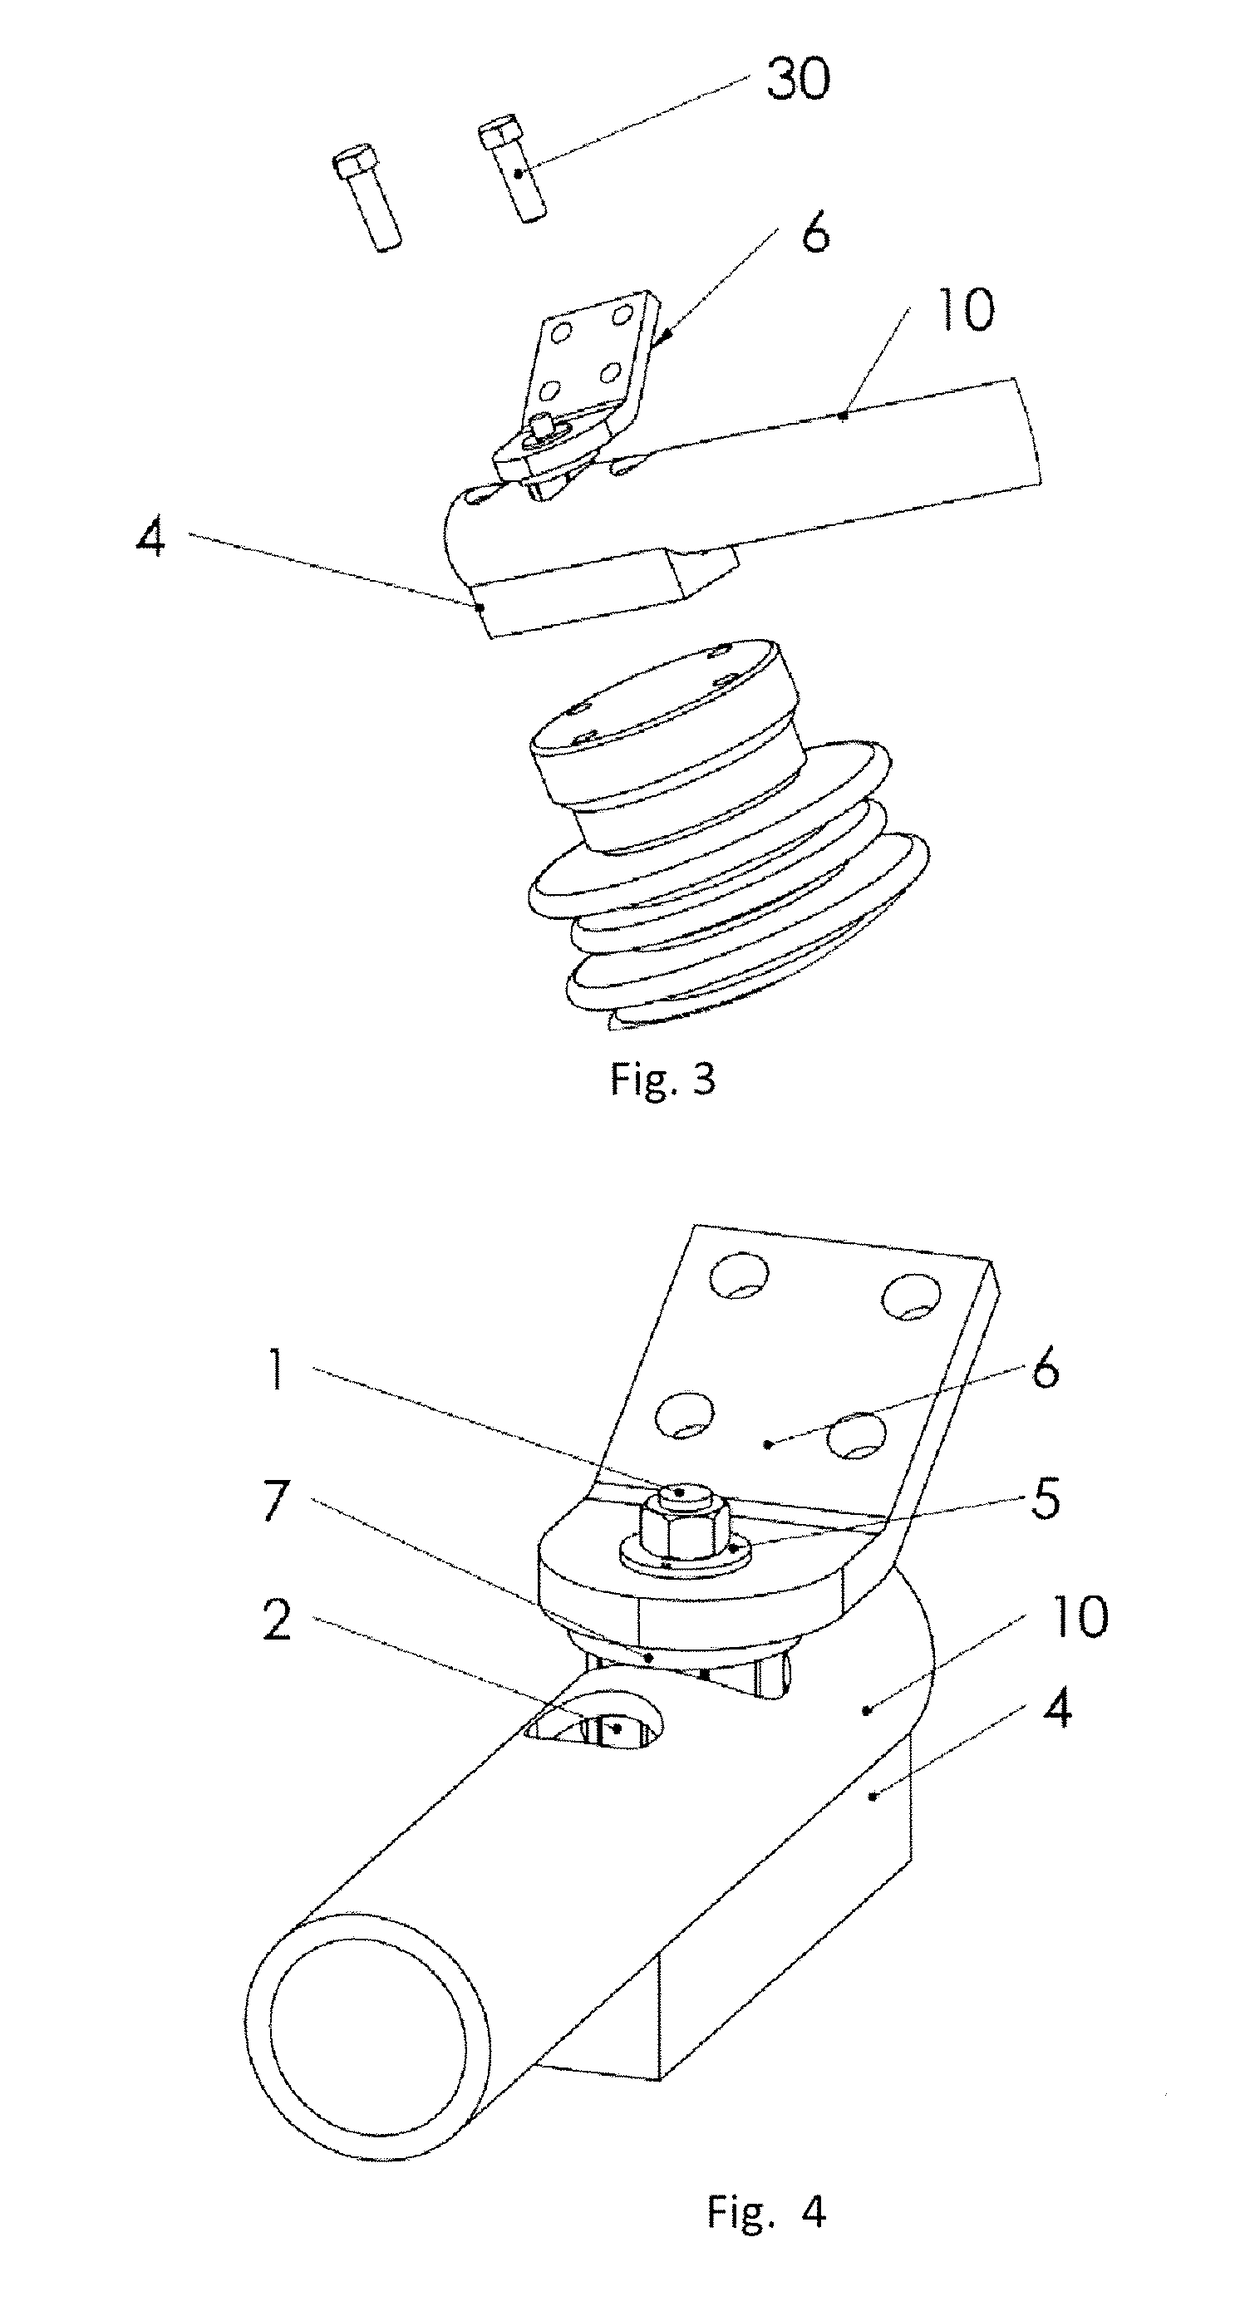 Rotary Contact System Intended to be Incorporated into the Tubular Conductors of a High-Voltage Switch